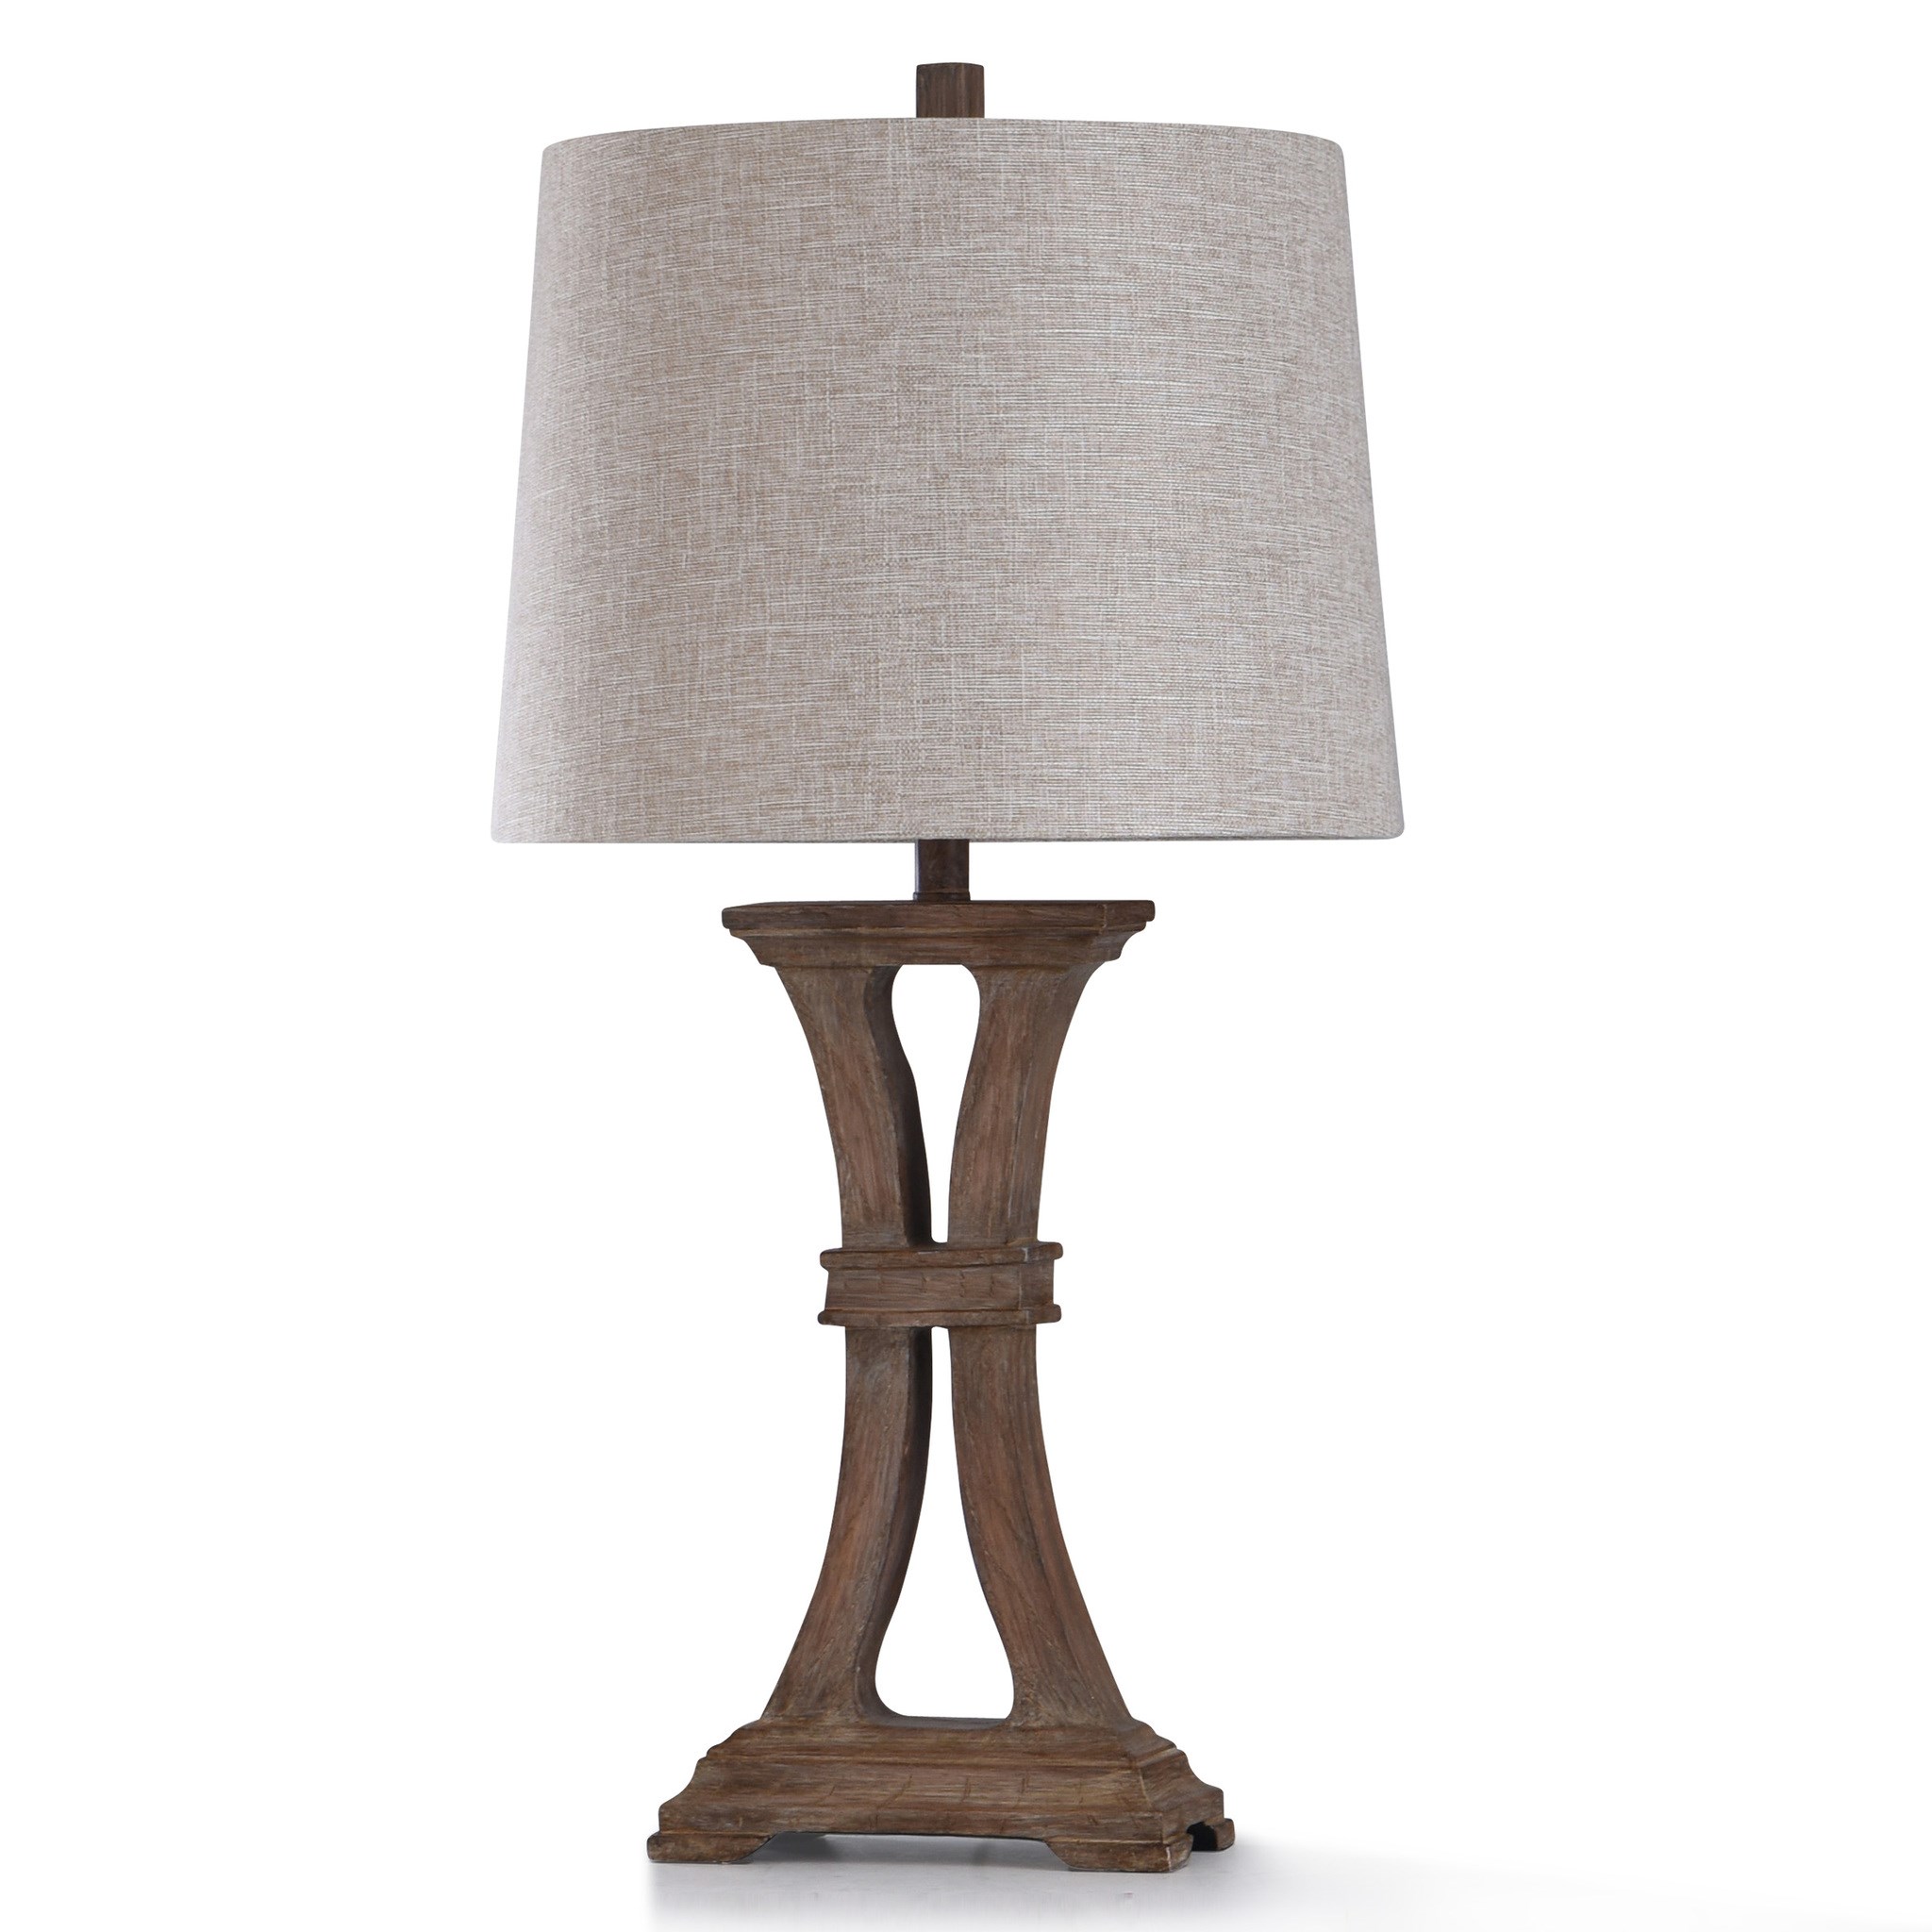 ROANOKE TABLE LAMP 17in w. X 33in ht. Traditional Painted Old Wood Style Banded Post Table